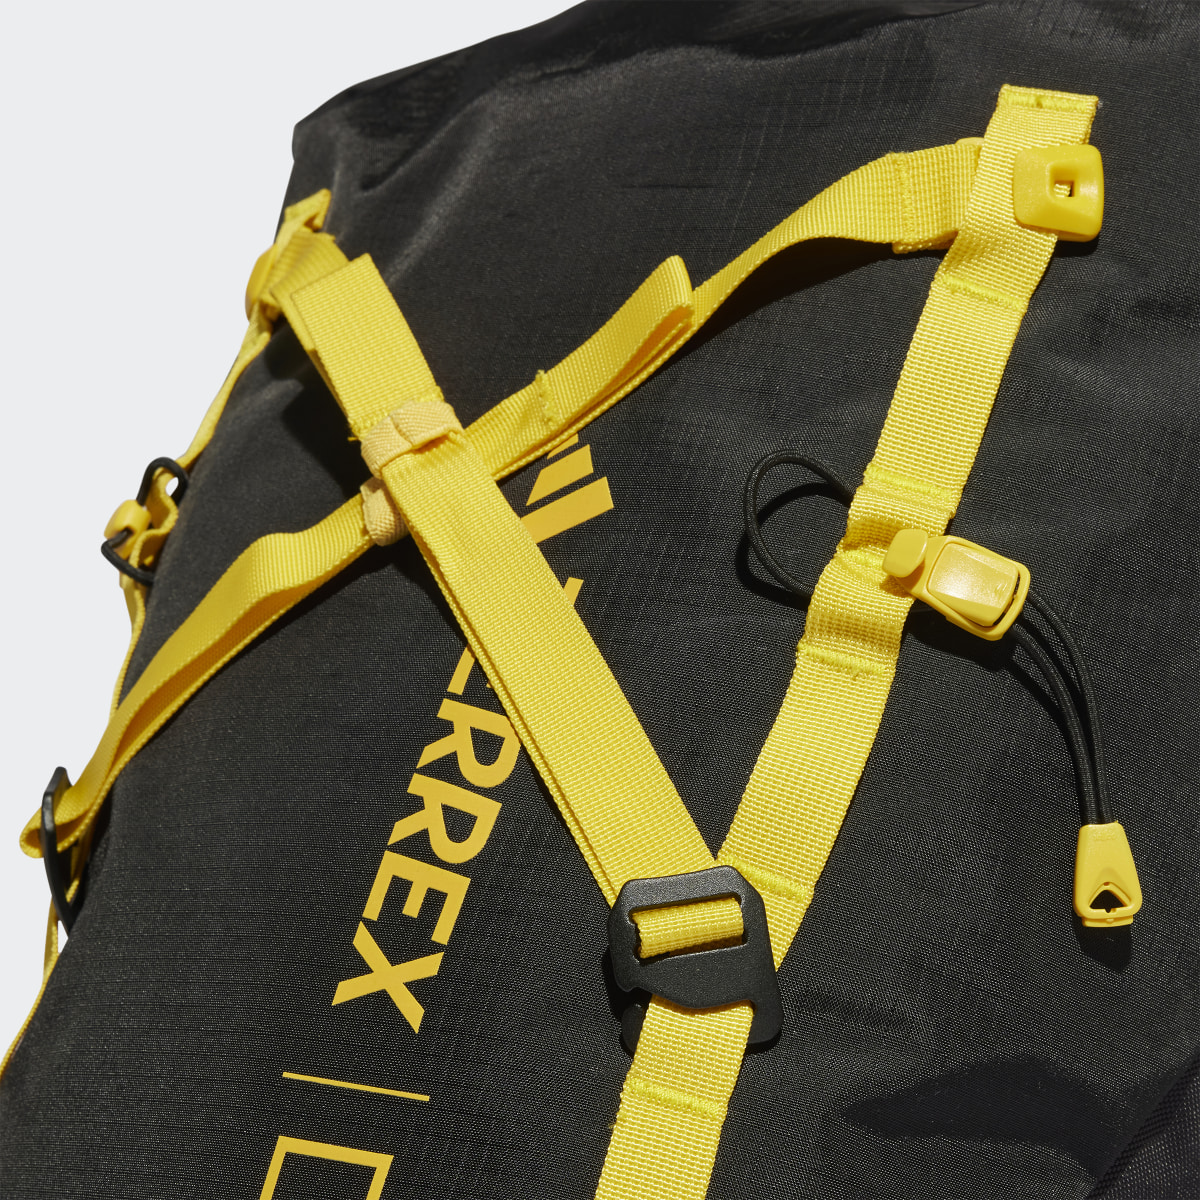 Adidas Colorful x National Geographic AEROREADY Backpack. 7